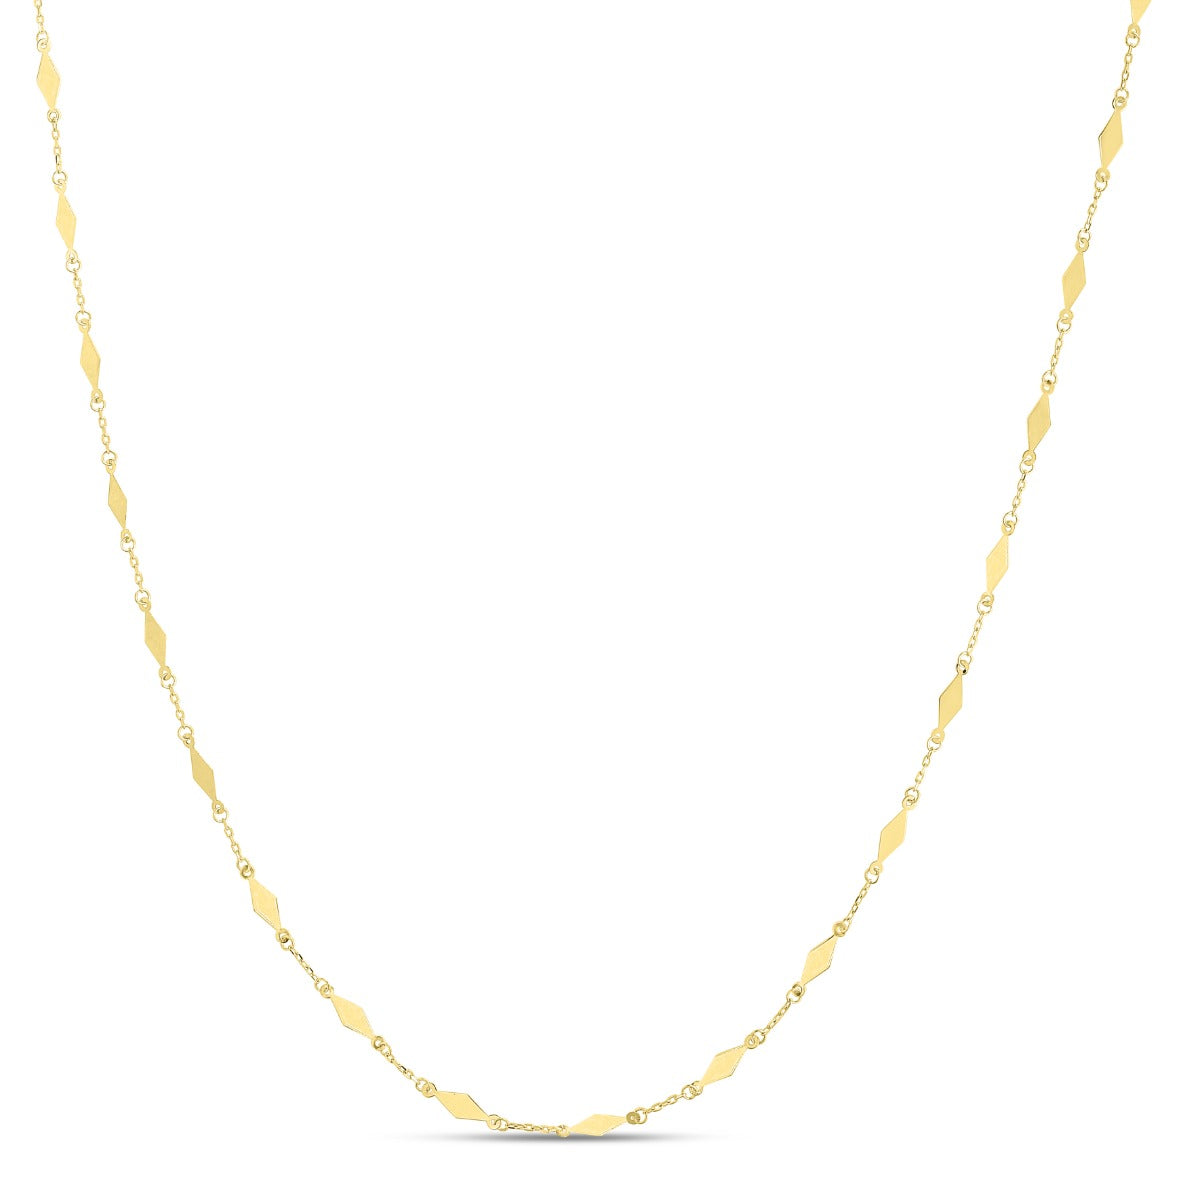 14K Gold Polished Long Diamond Shape Station Mirror Chain Necklace with Lobster Clasp